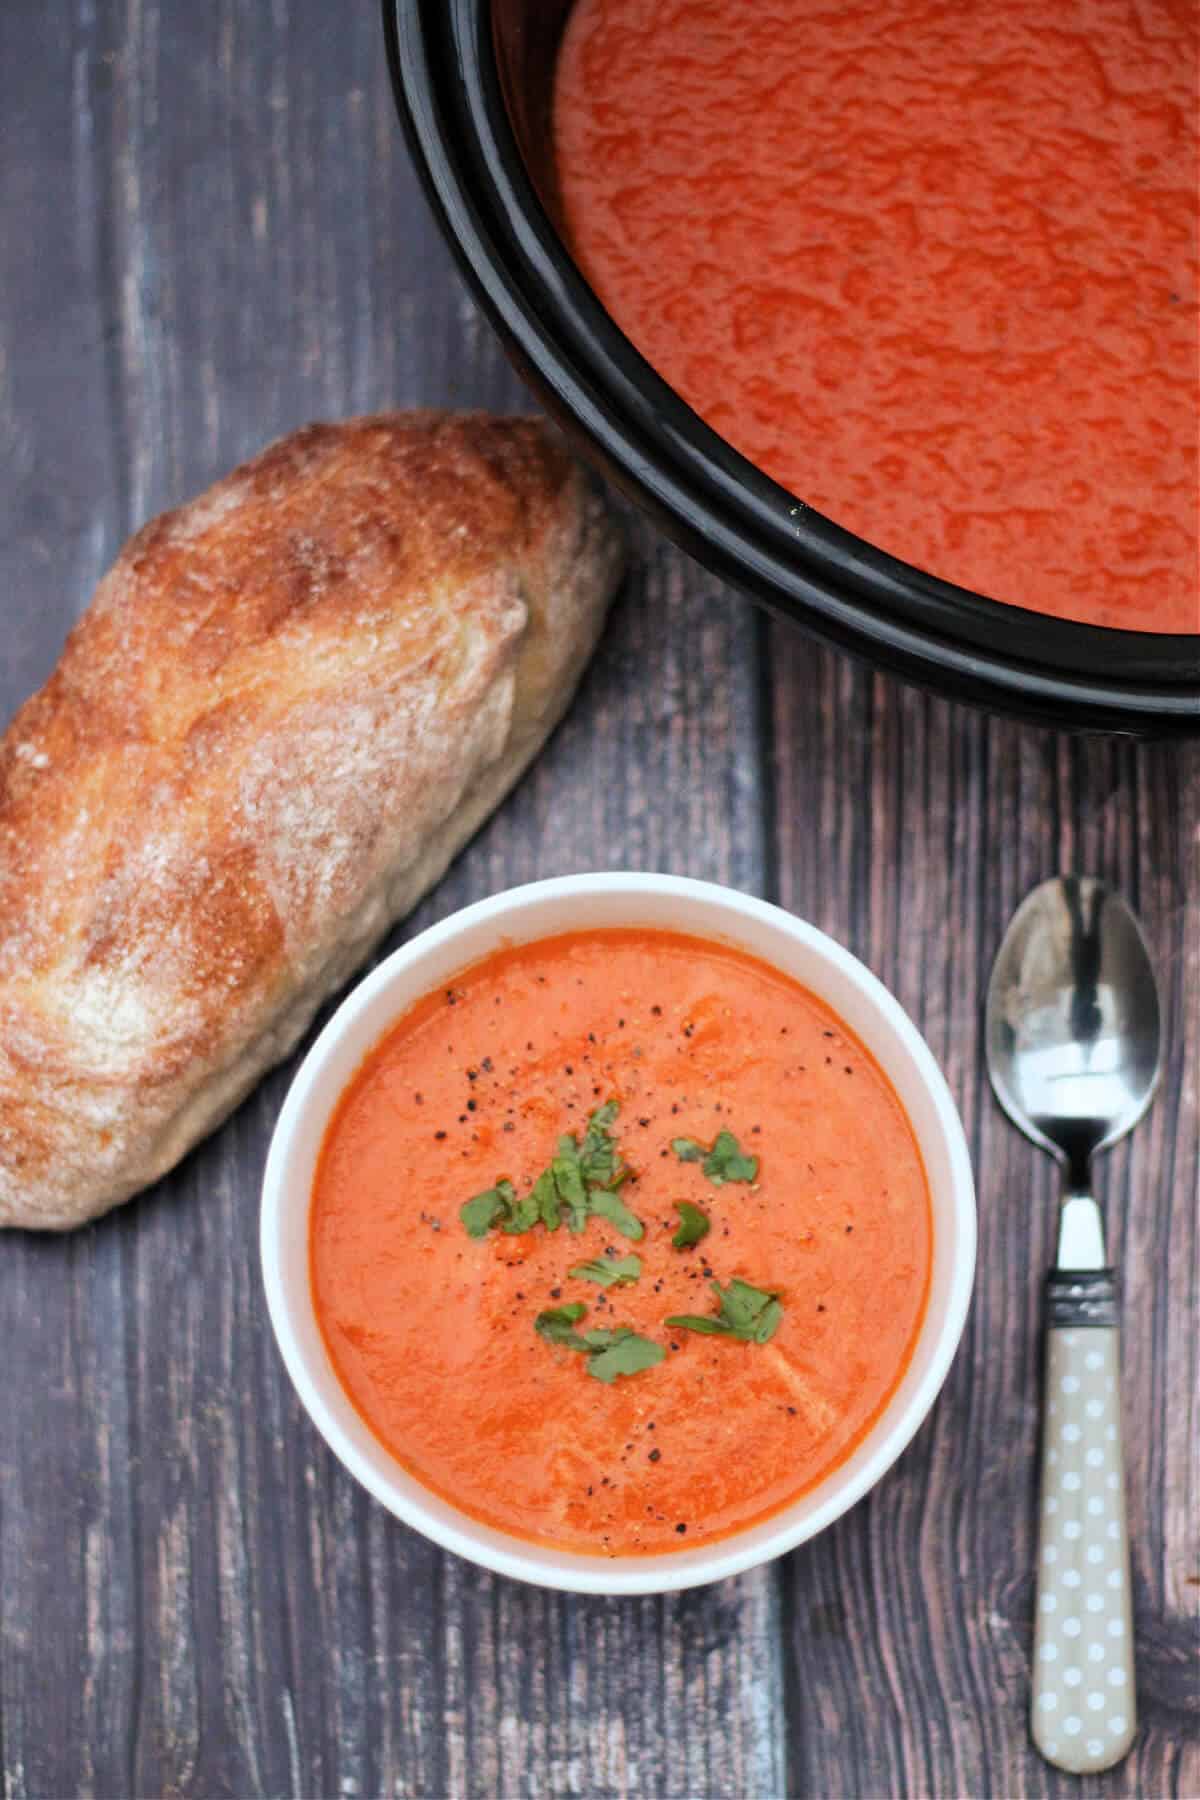 Bowl of soup with bread and serving pot.